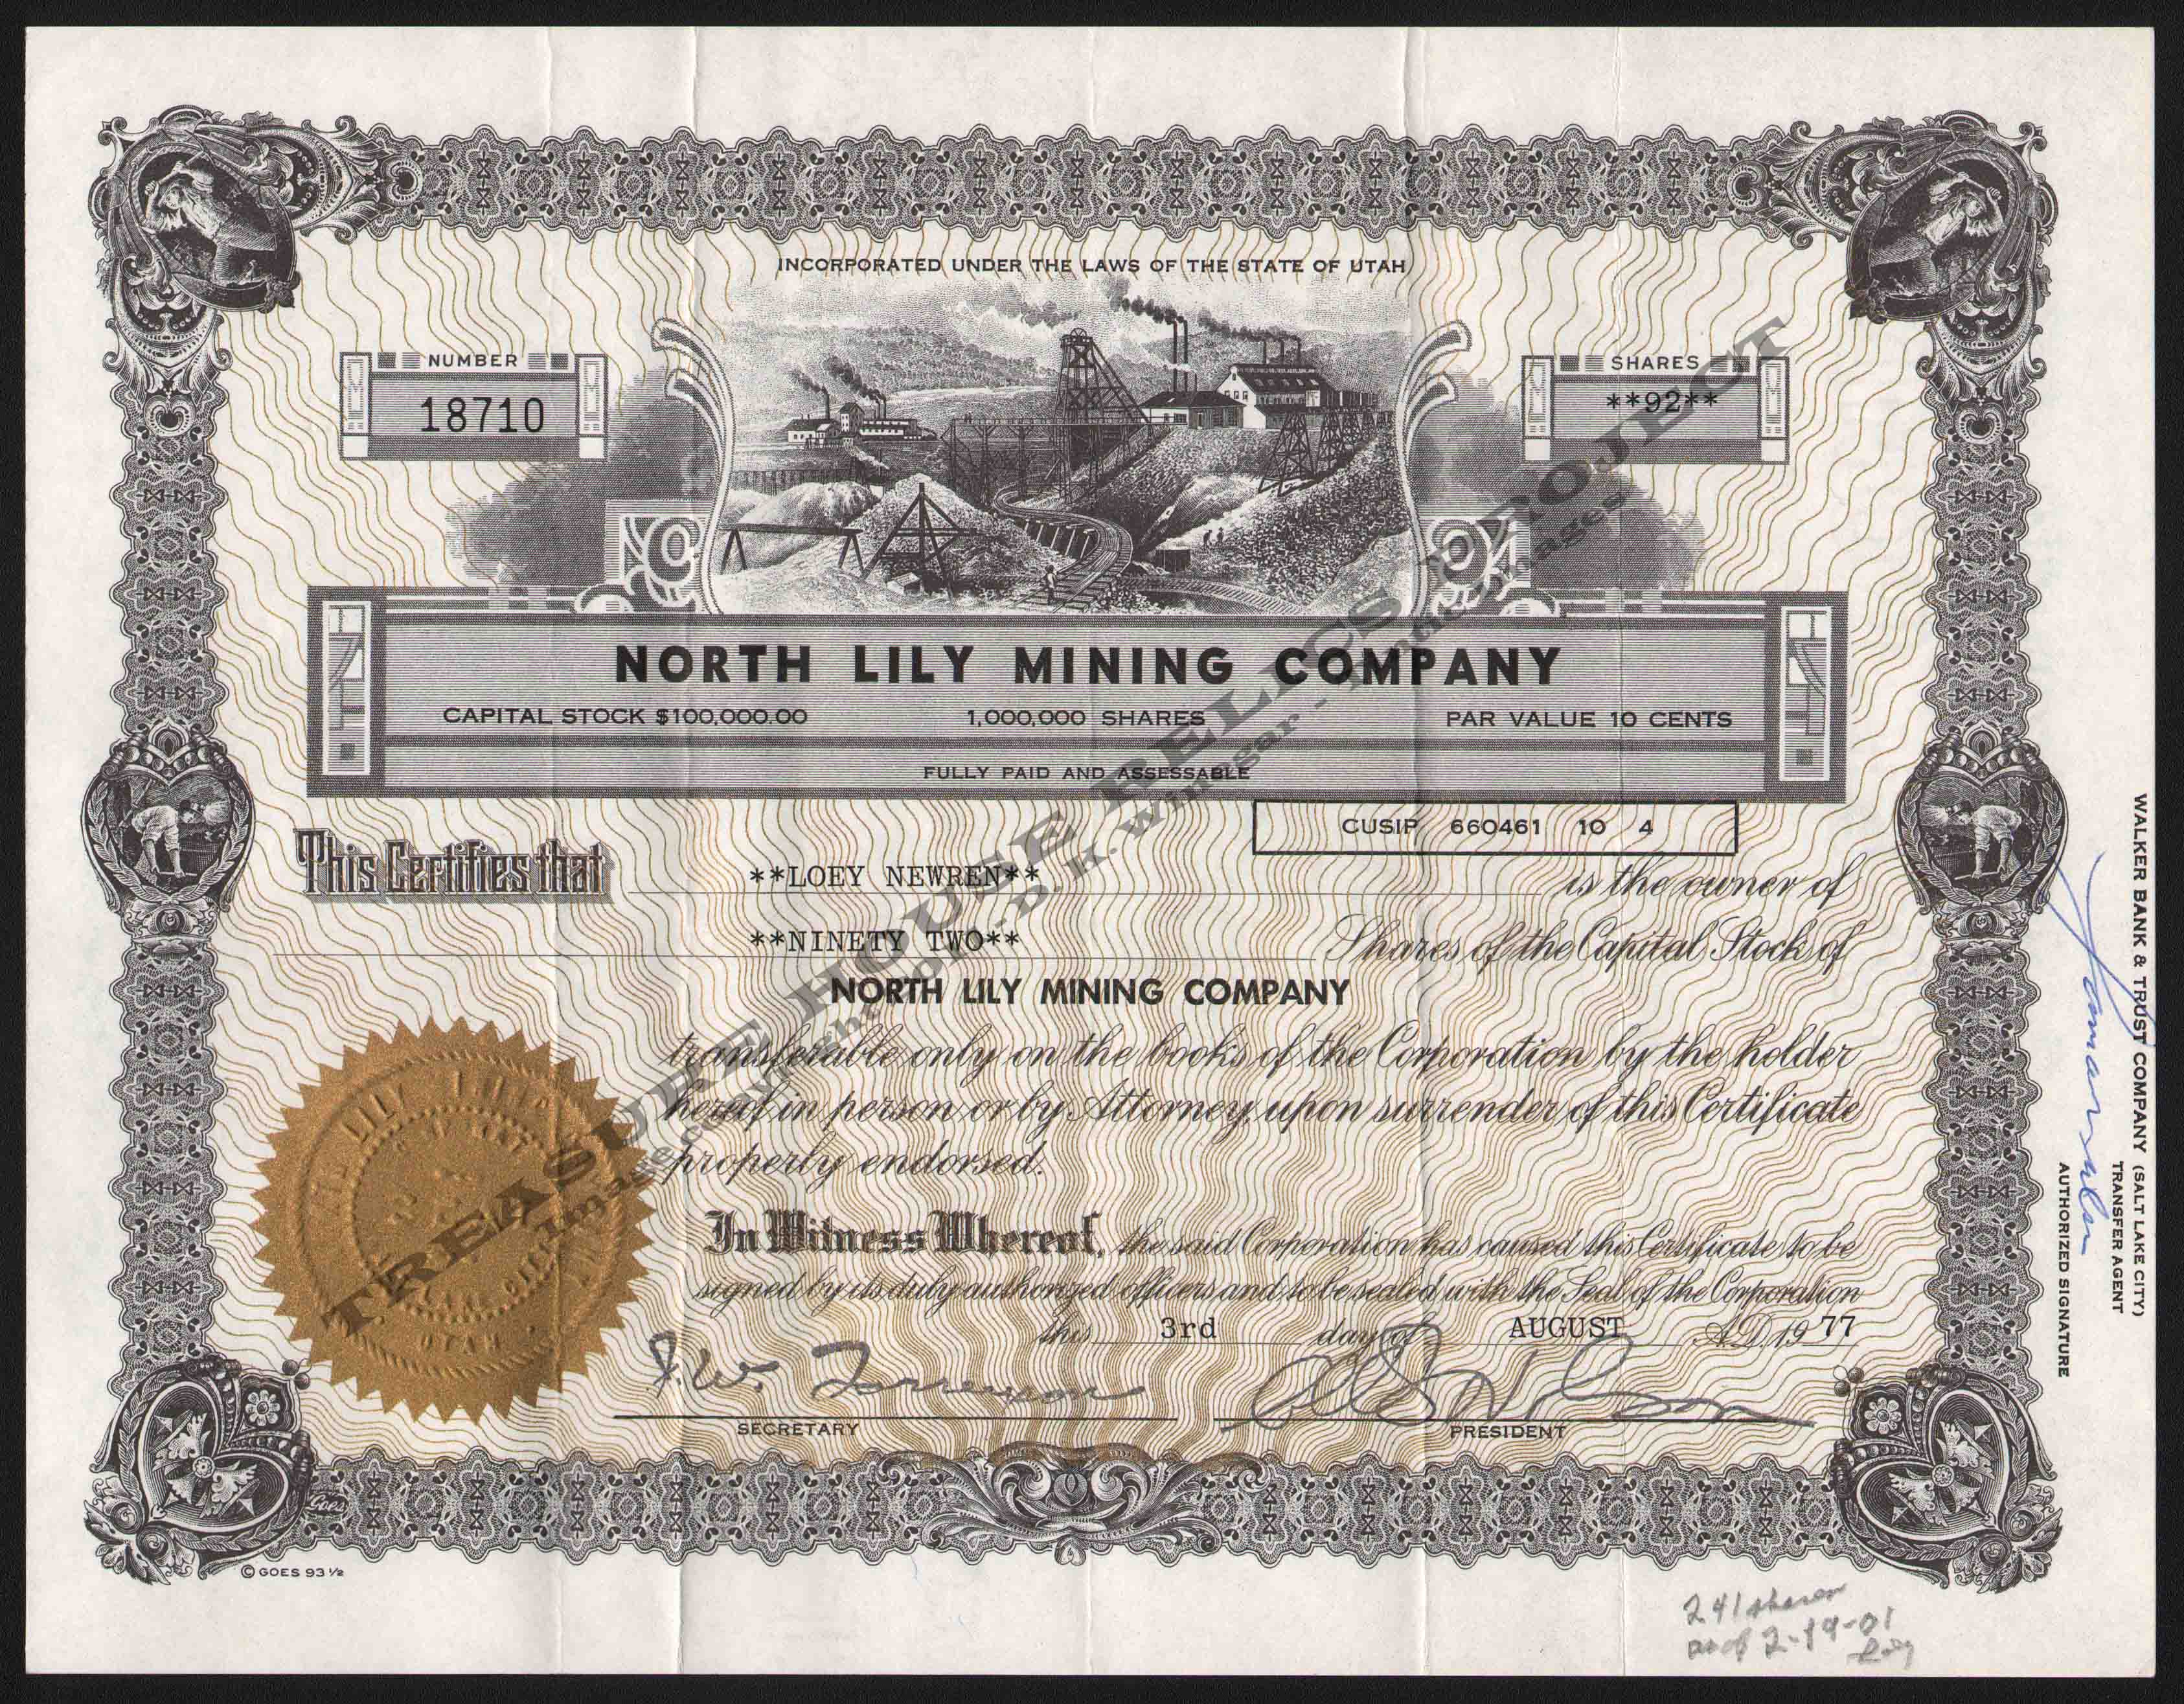 NORTH_LILY_MINING_CO_18710_300_emboss.jpg